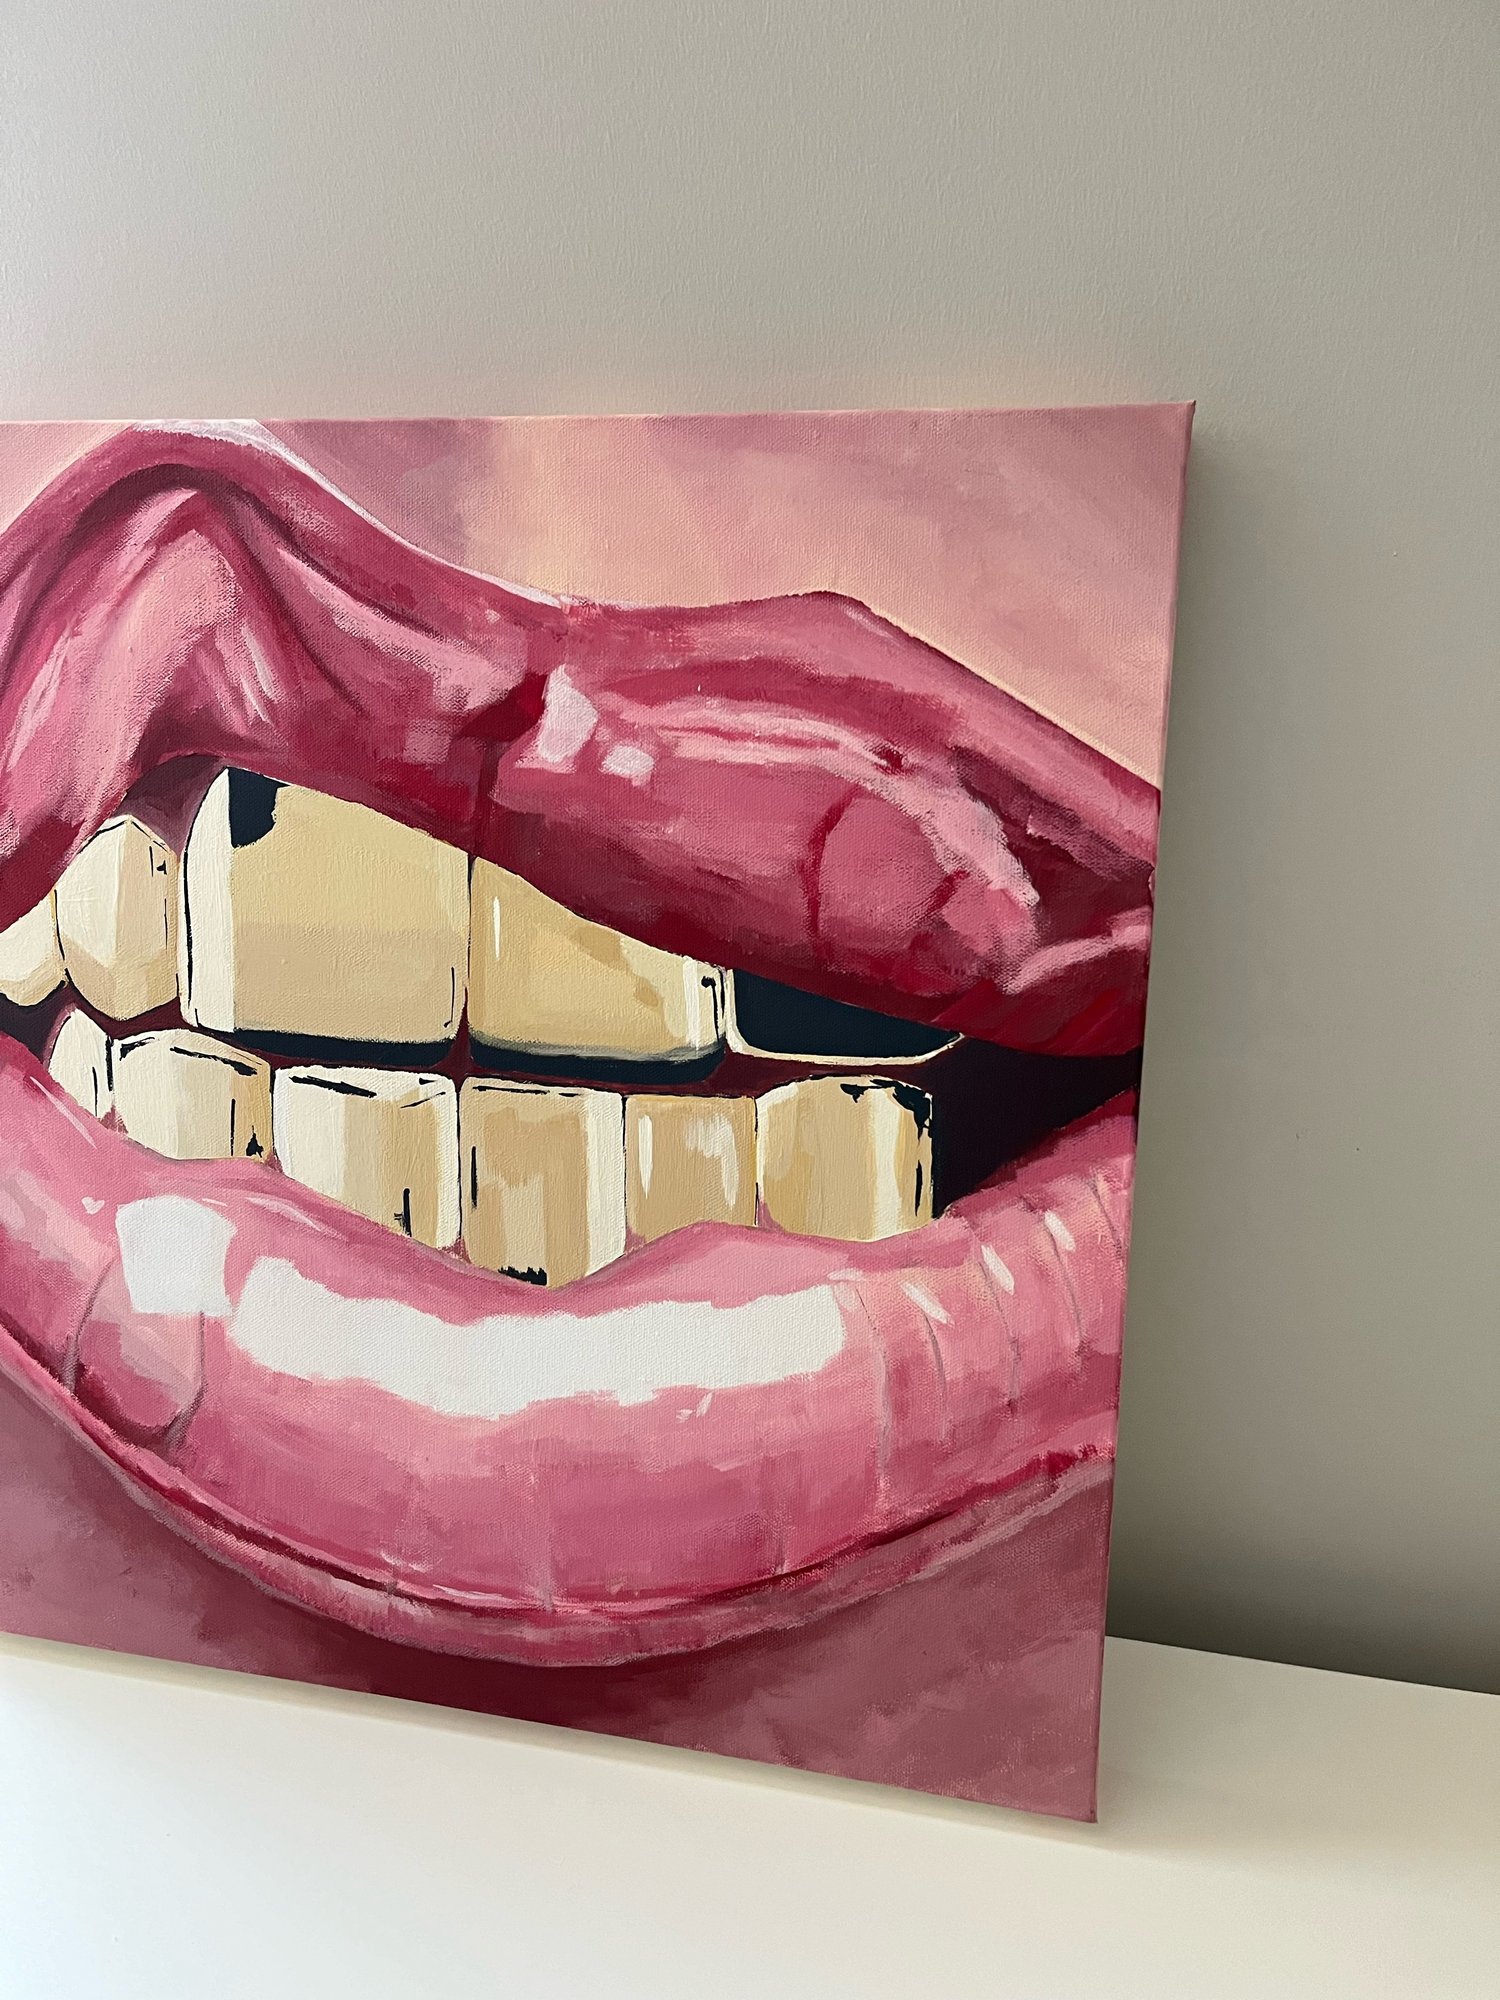 Image of Grillz Acrylic Painting